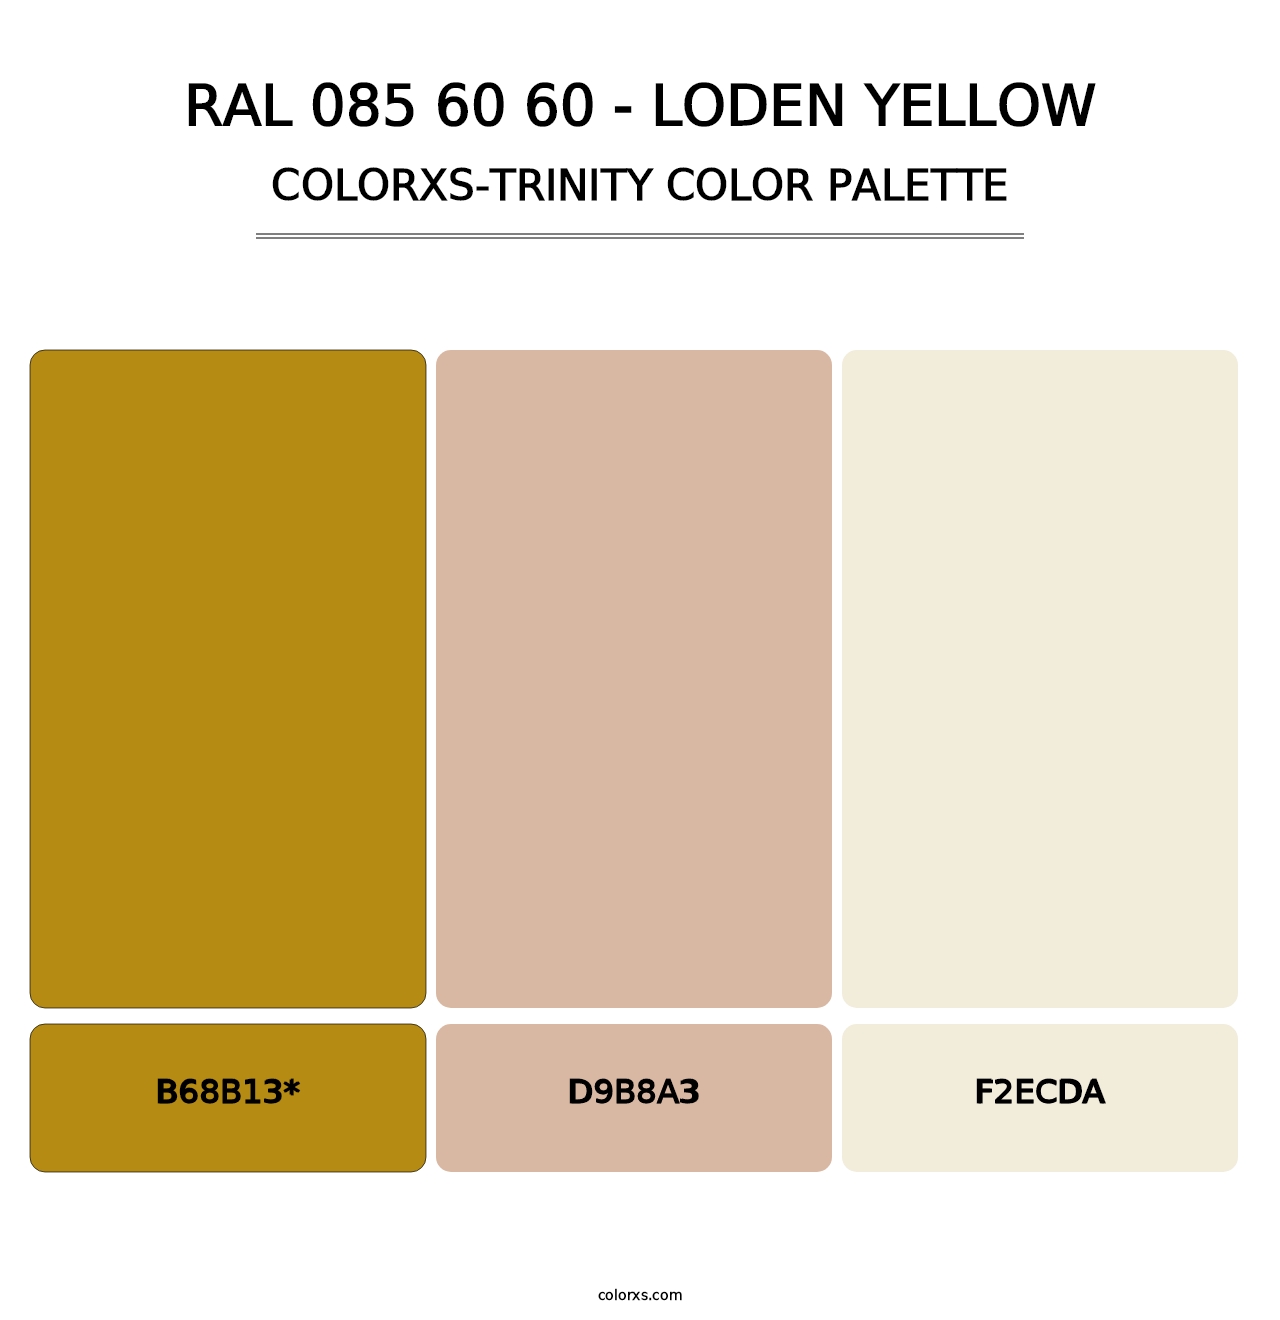 RAL 085 60 60 - Loden Yellow - Colorxs Trinity Palette